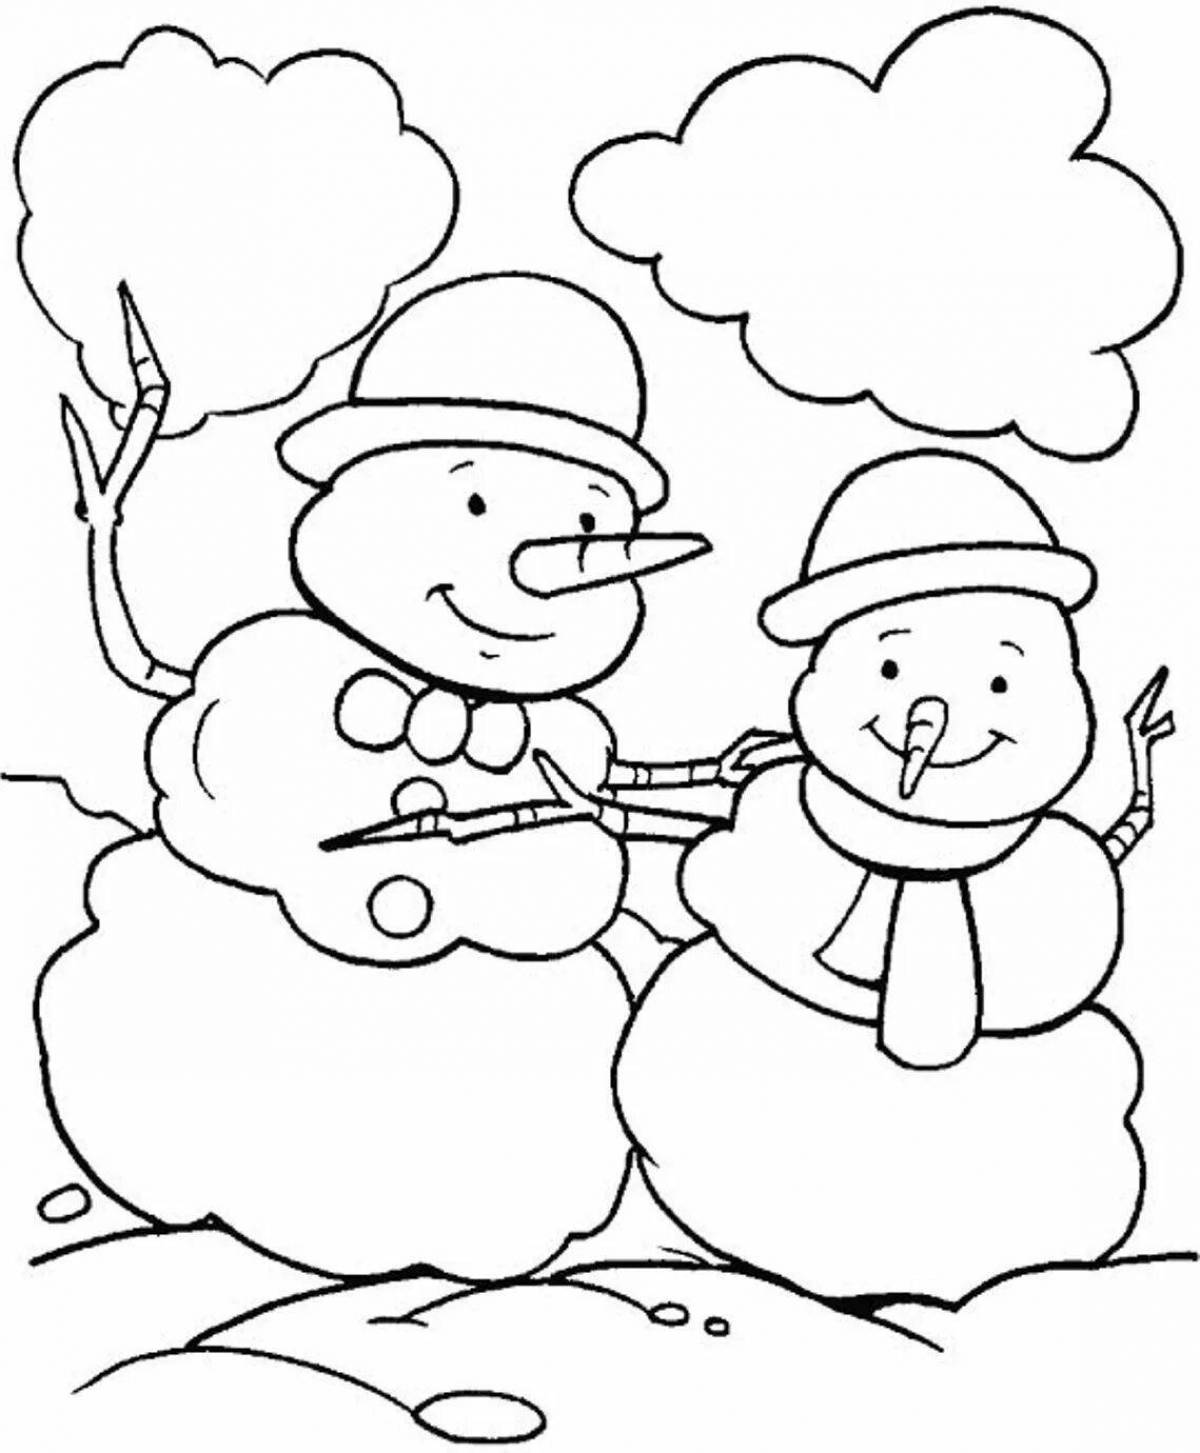 Awesome winter simple coloring pages